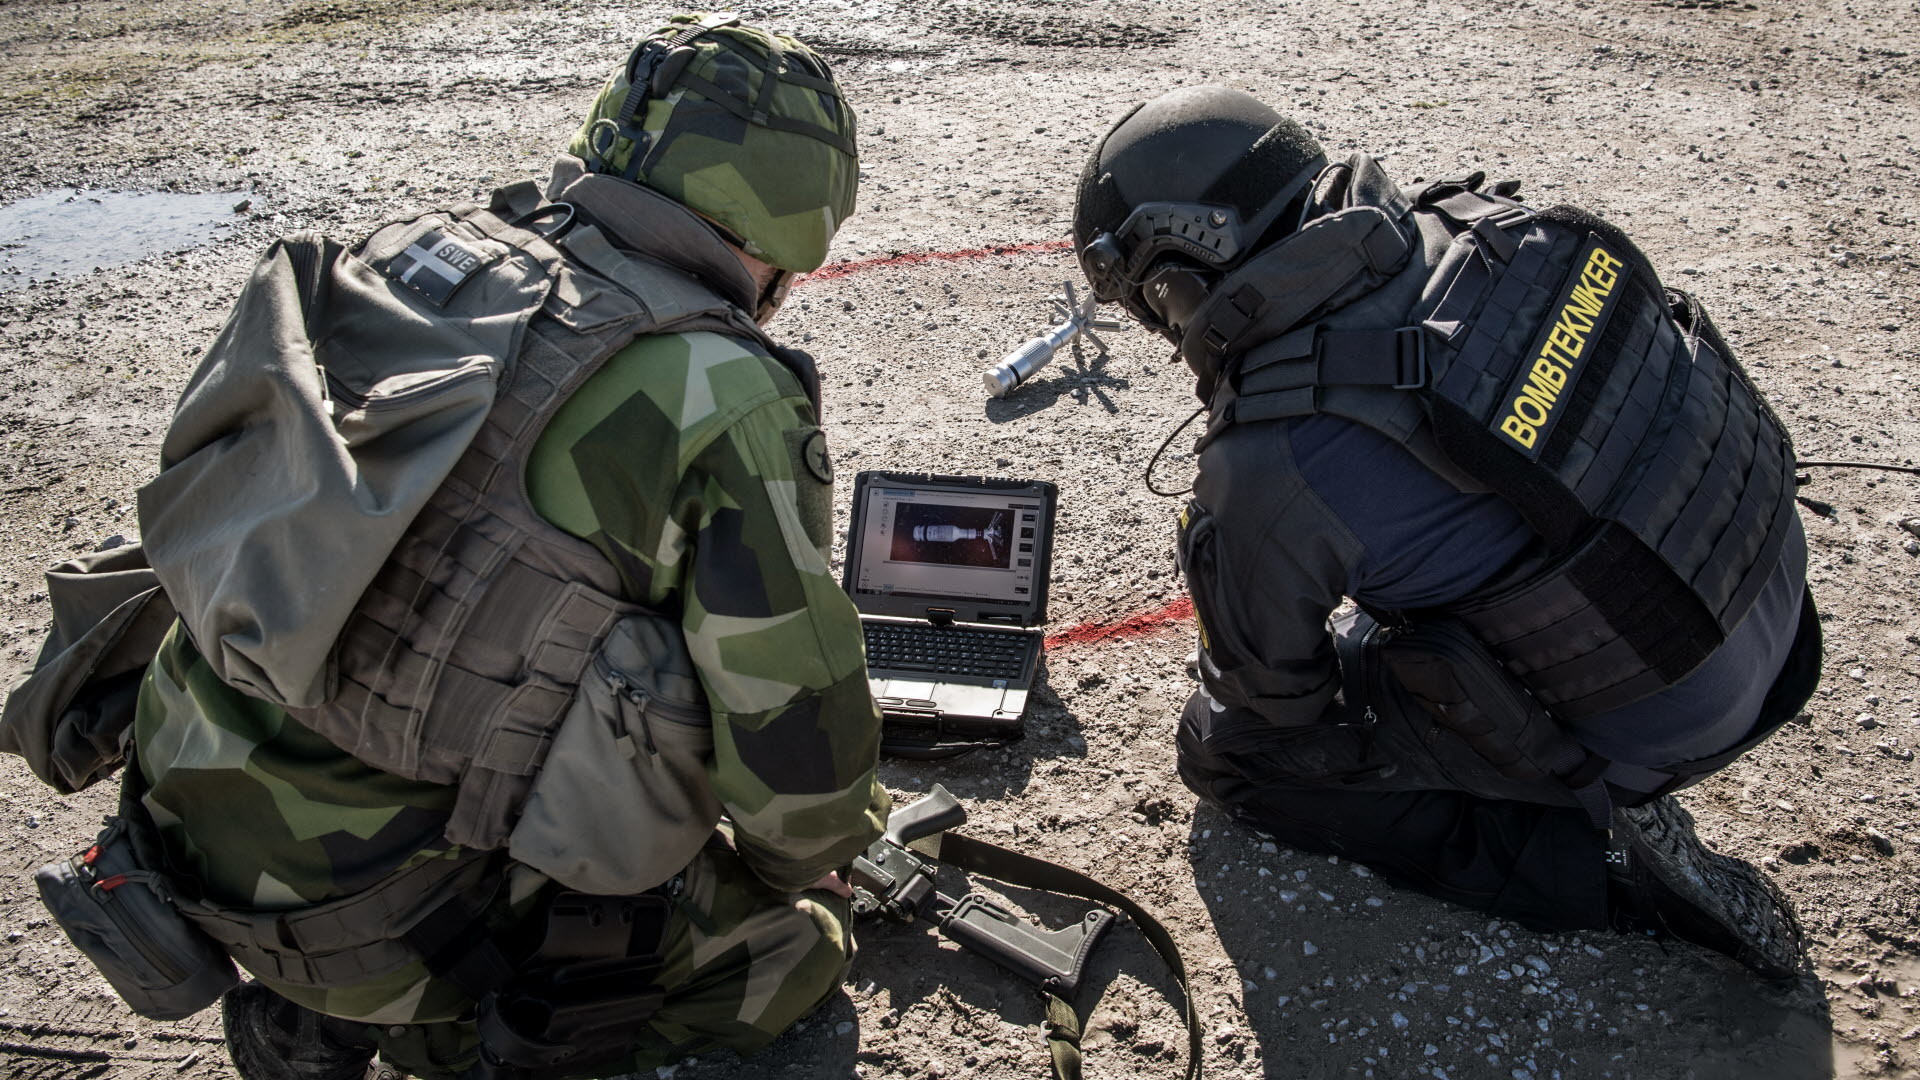 1920x1080 Explosive Ordnance Disposal (EOD) personnel from the Armed Forces and the  Police work on a task together. In the picture, the Armed Forces' EOD  database ...